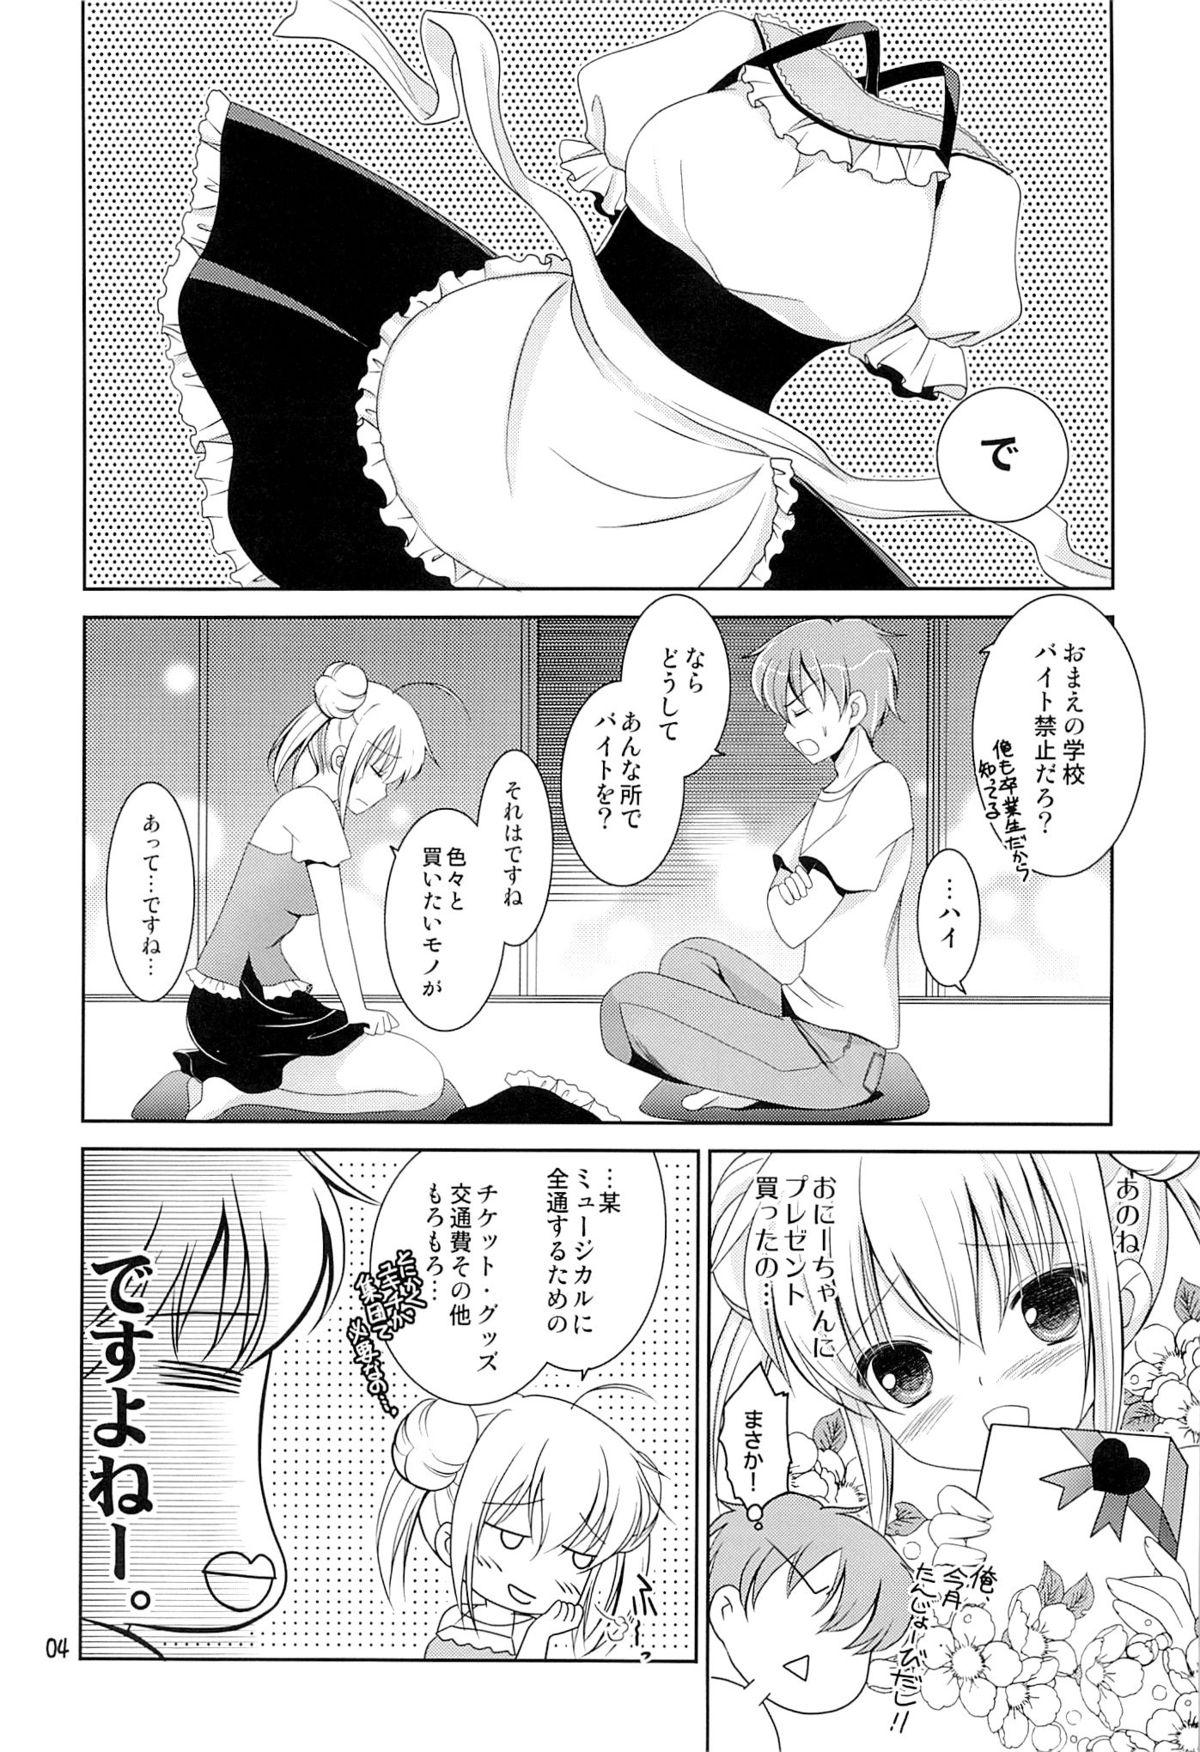 Perfect Butt Imouto Maid Str8 - Page 3